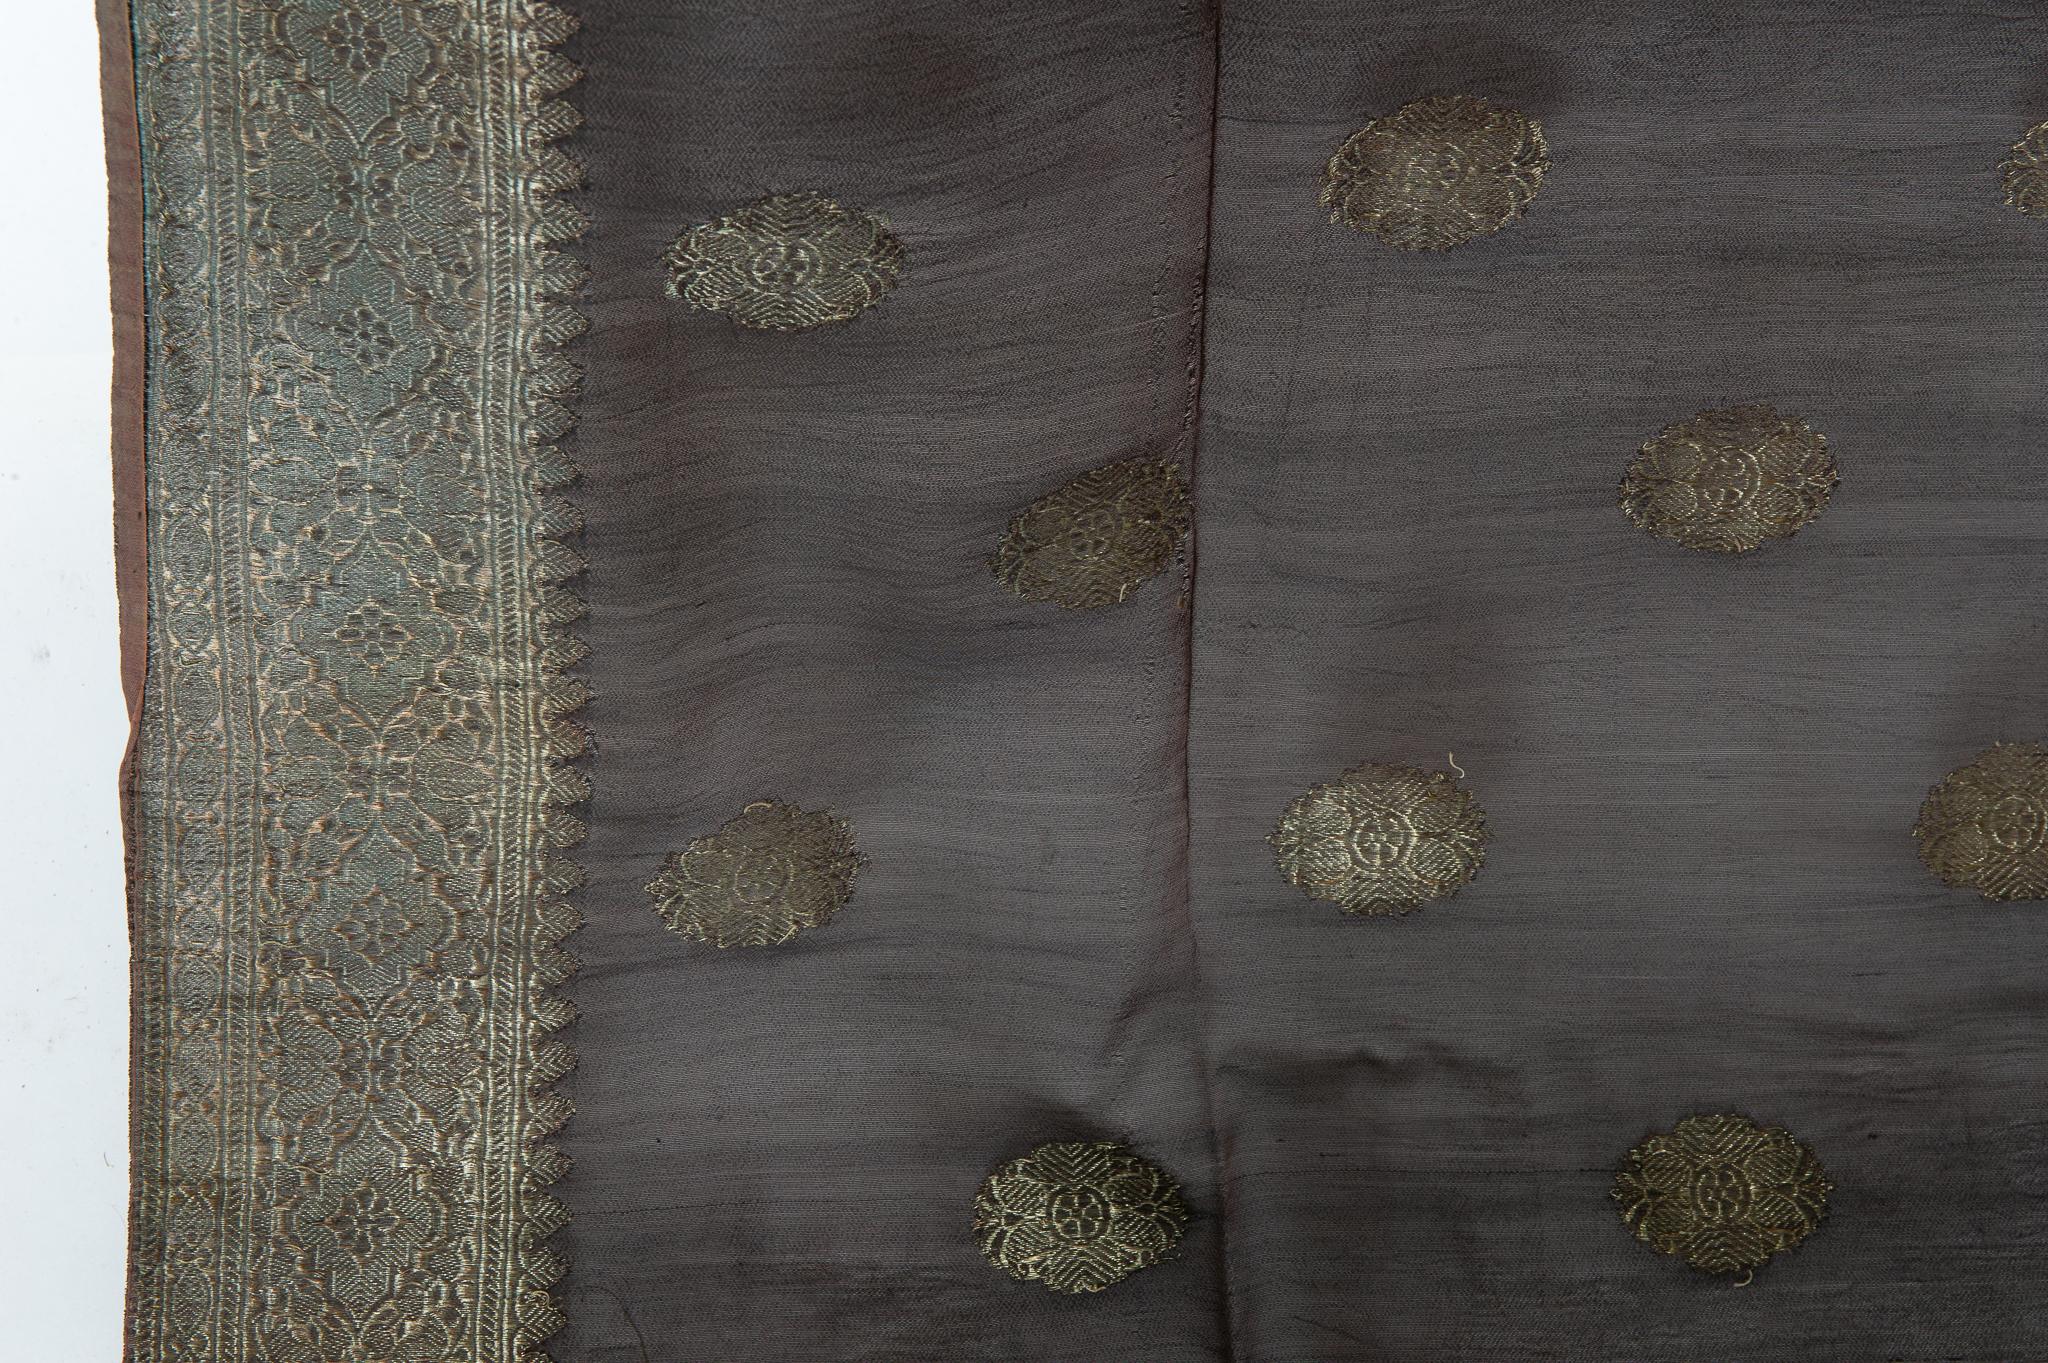 Synthetic Vintage Indian Sari Dark Brown Color, Unusual Curtains or an Evening Dress